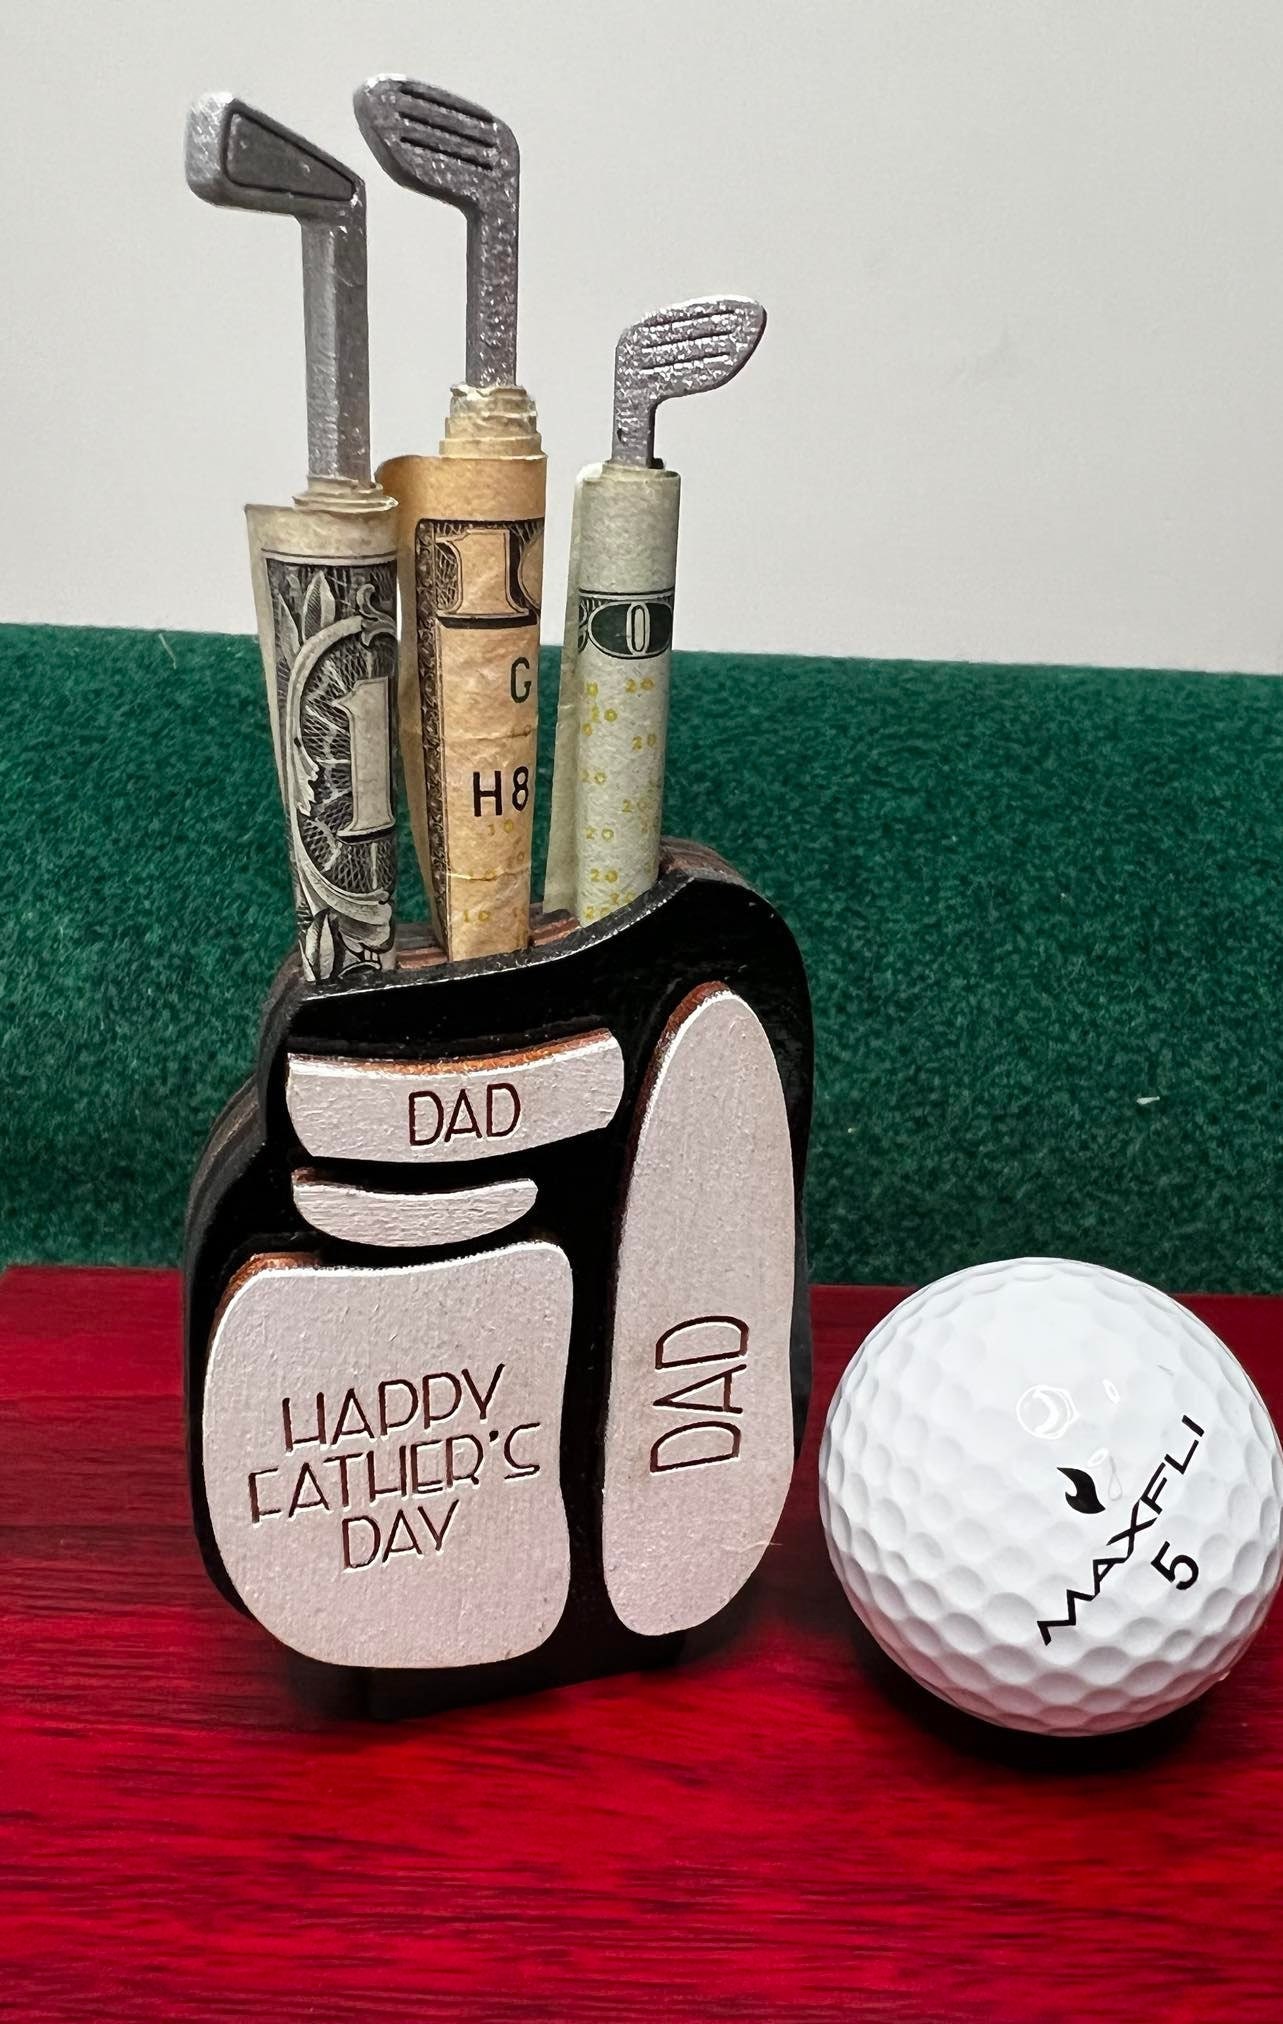 Best Golf Gifts For Dad, Golf Gift Ideas For Him – Abacus